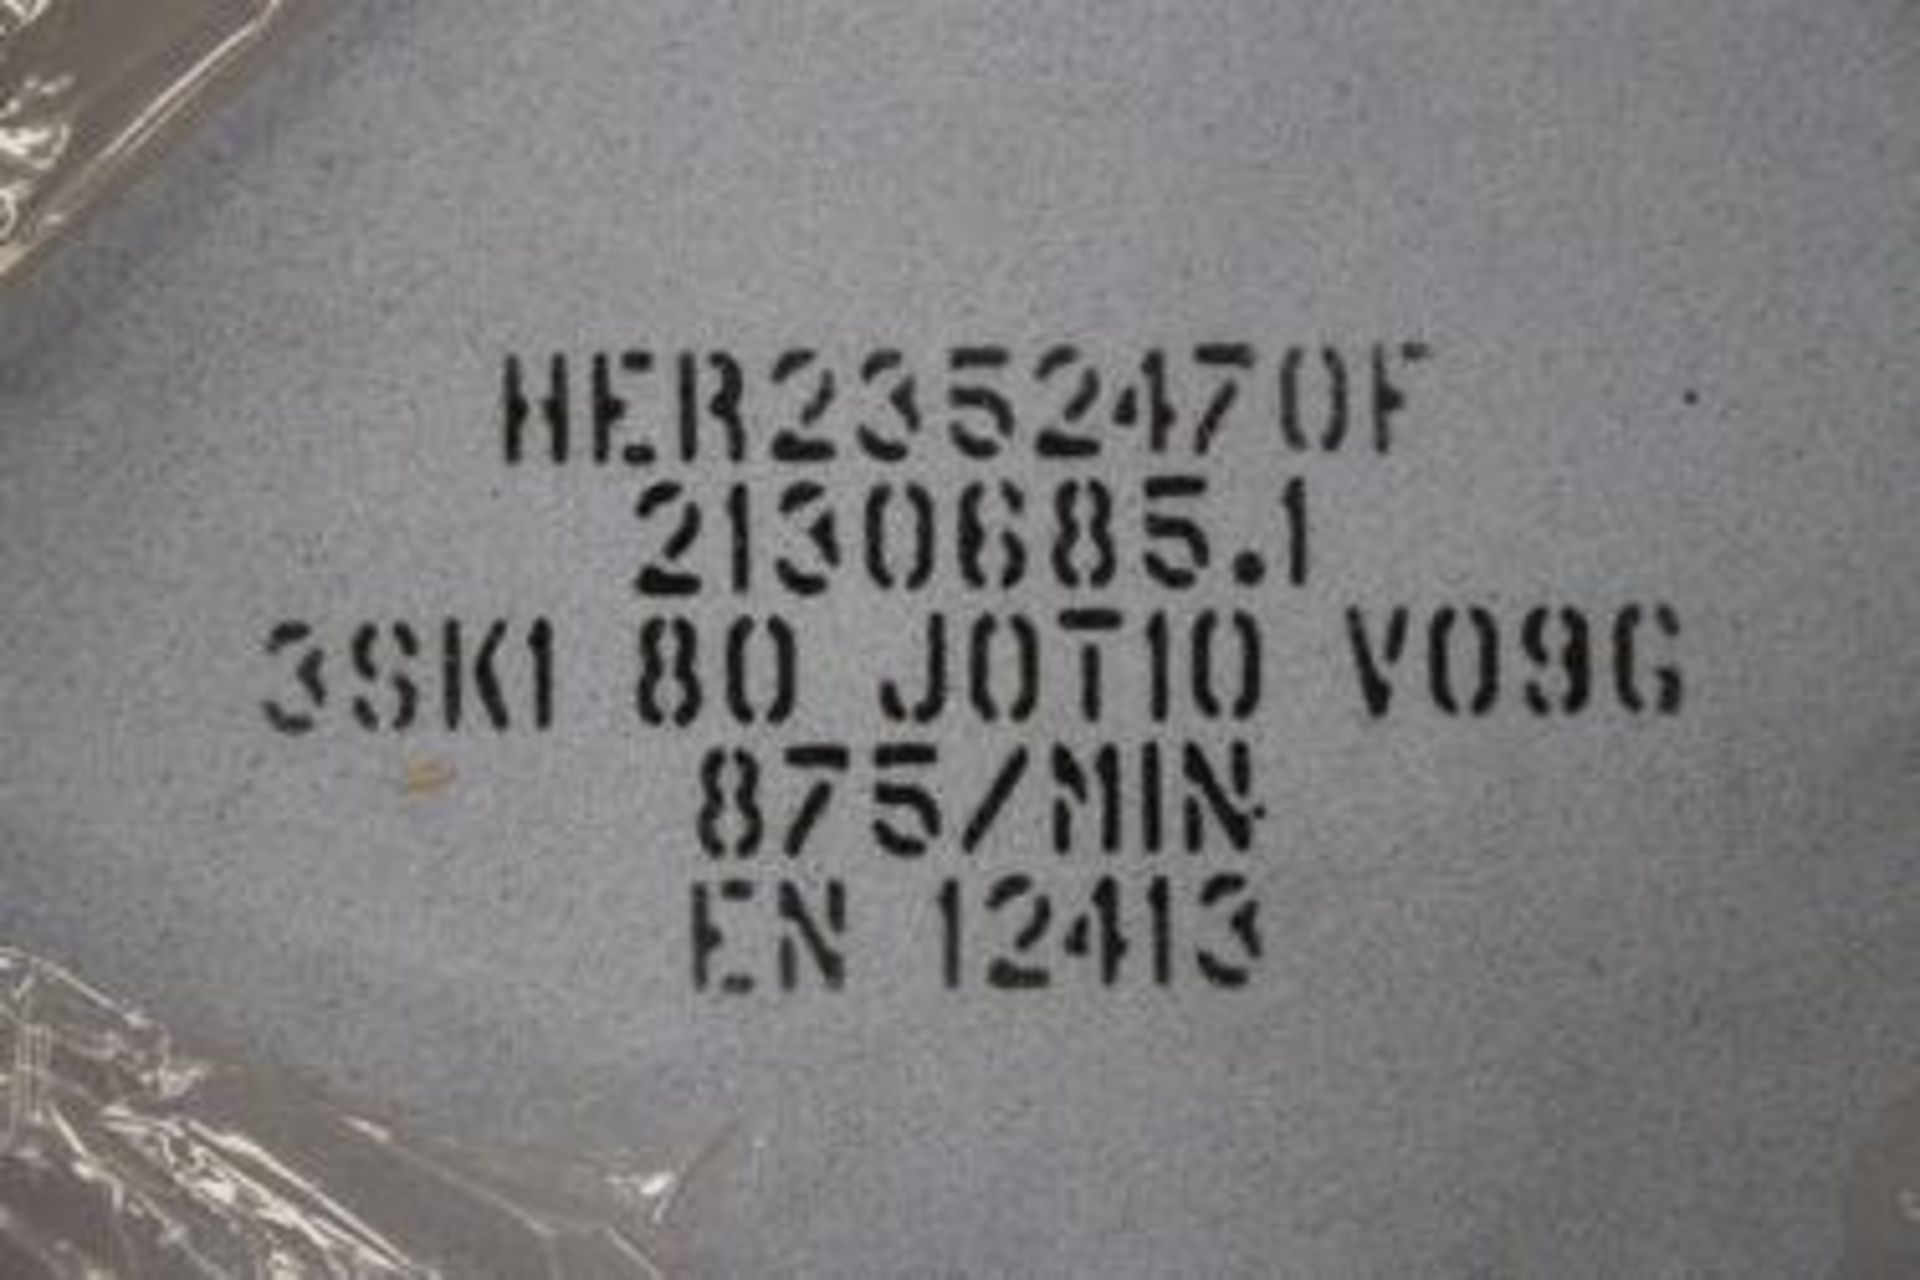 2 x P80 grinding wheels, code HER235247OF, size 762 x 75 x 304.8mm - New (E1) - Image 2 of 2